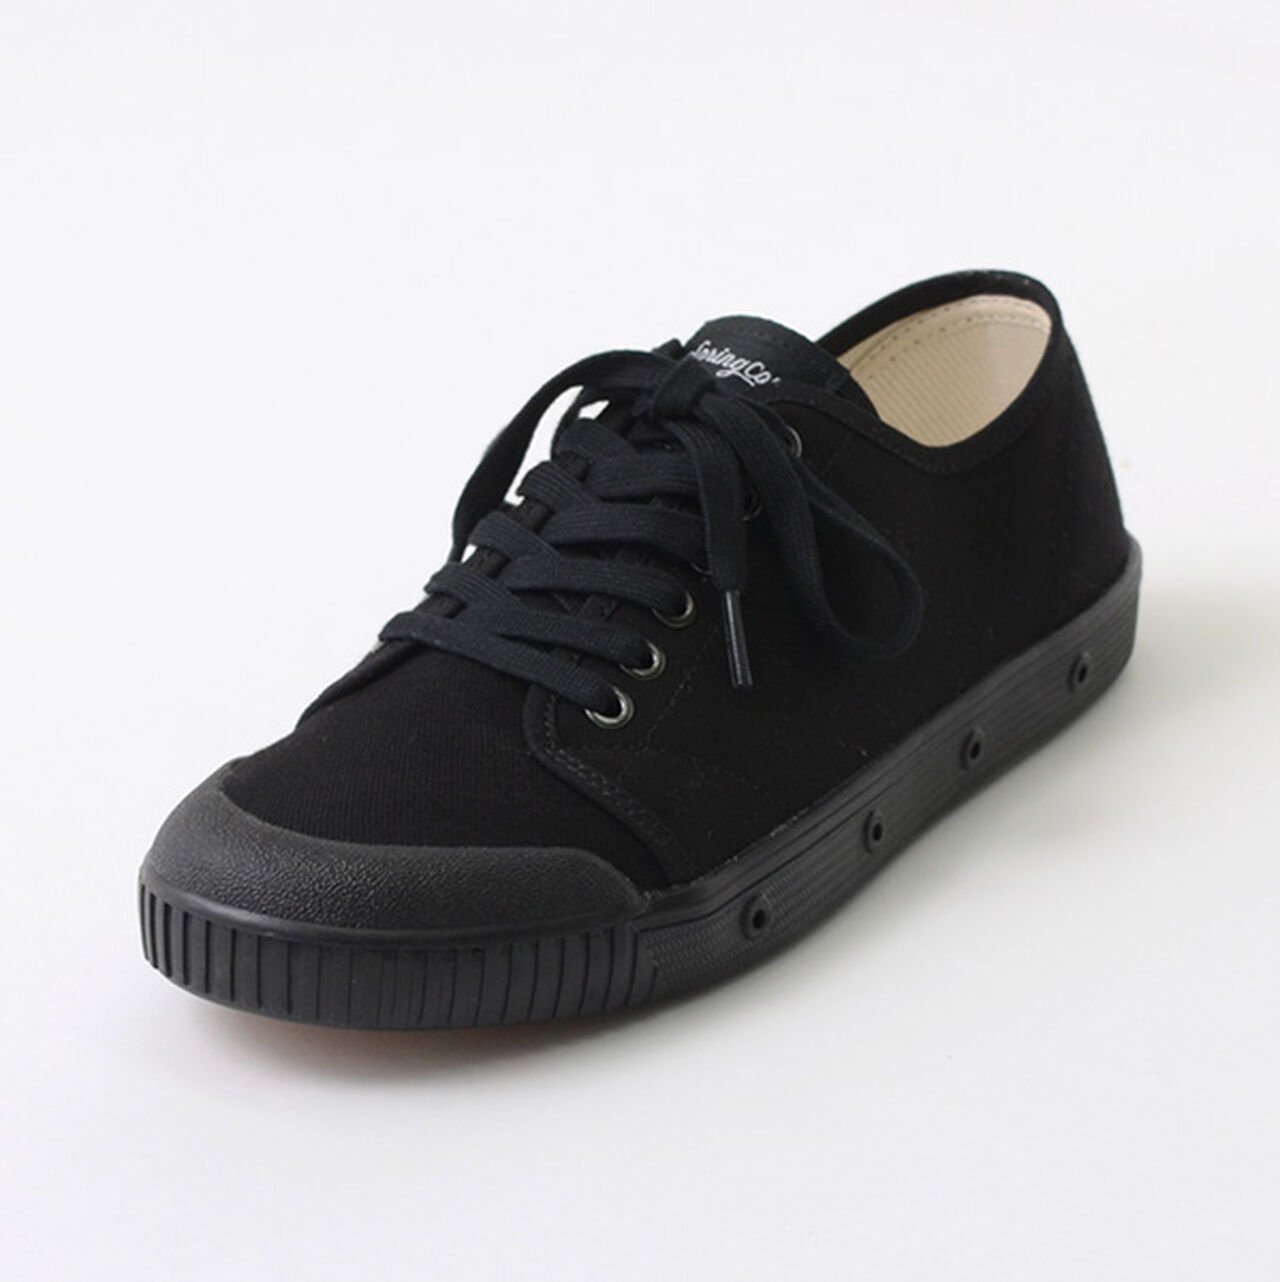 G2 Low Cut Canvas Sneakers,Black, large image number 0